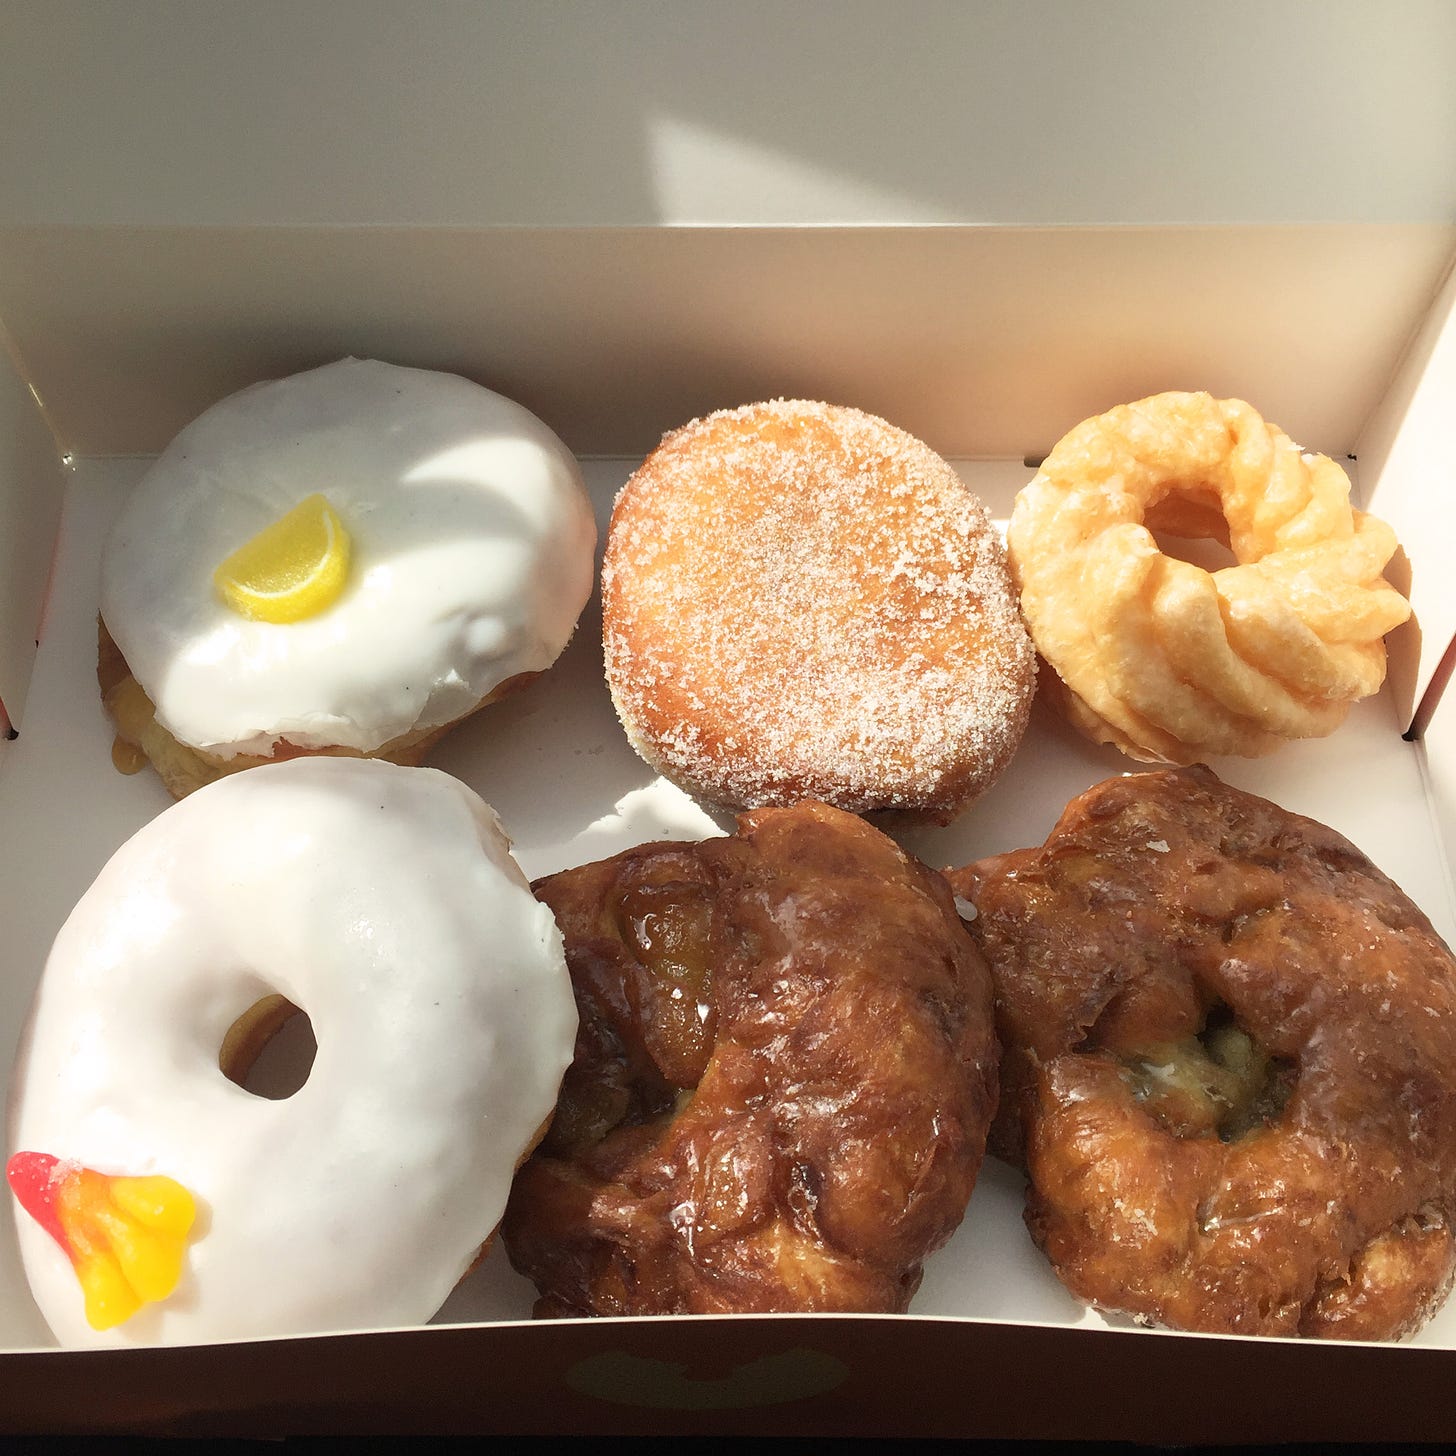 An open box with a white interior, filled with six donuts. Two fritters are in the bottom right, and above them are a cruller and a sugary jam donut, and on the left are two donuts with white glaze, each with a small gummy candy on top.